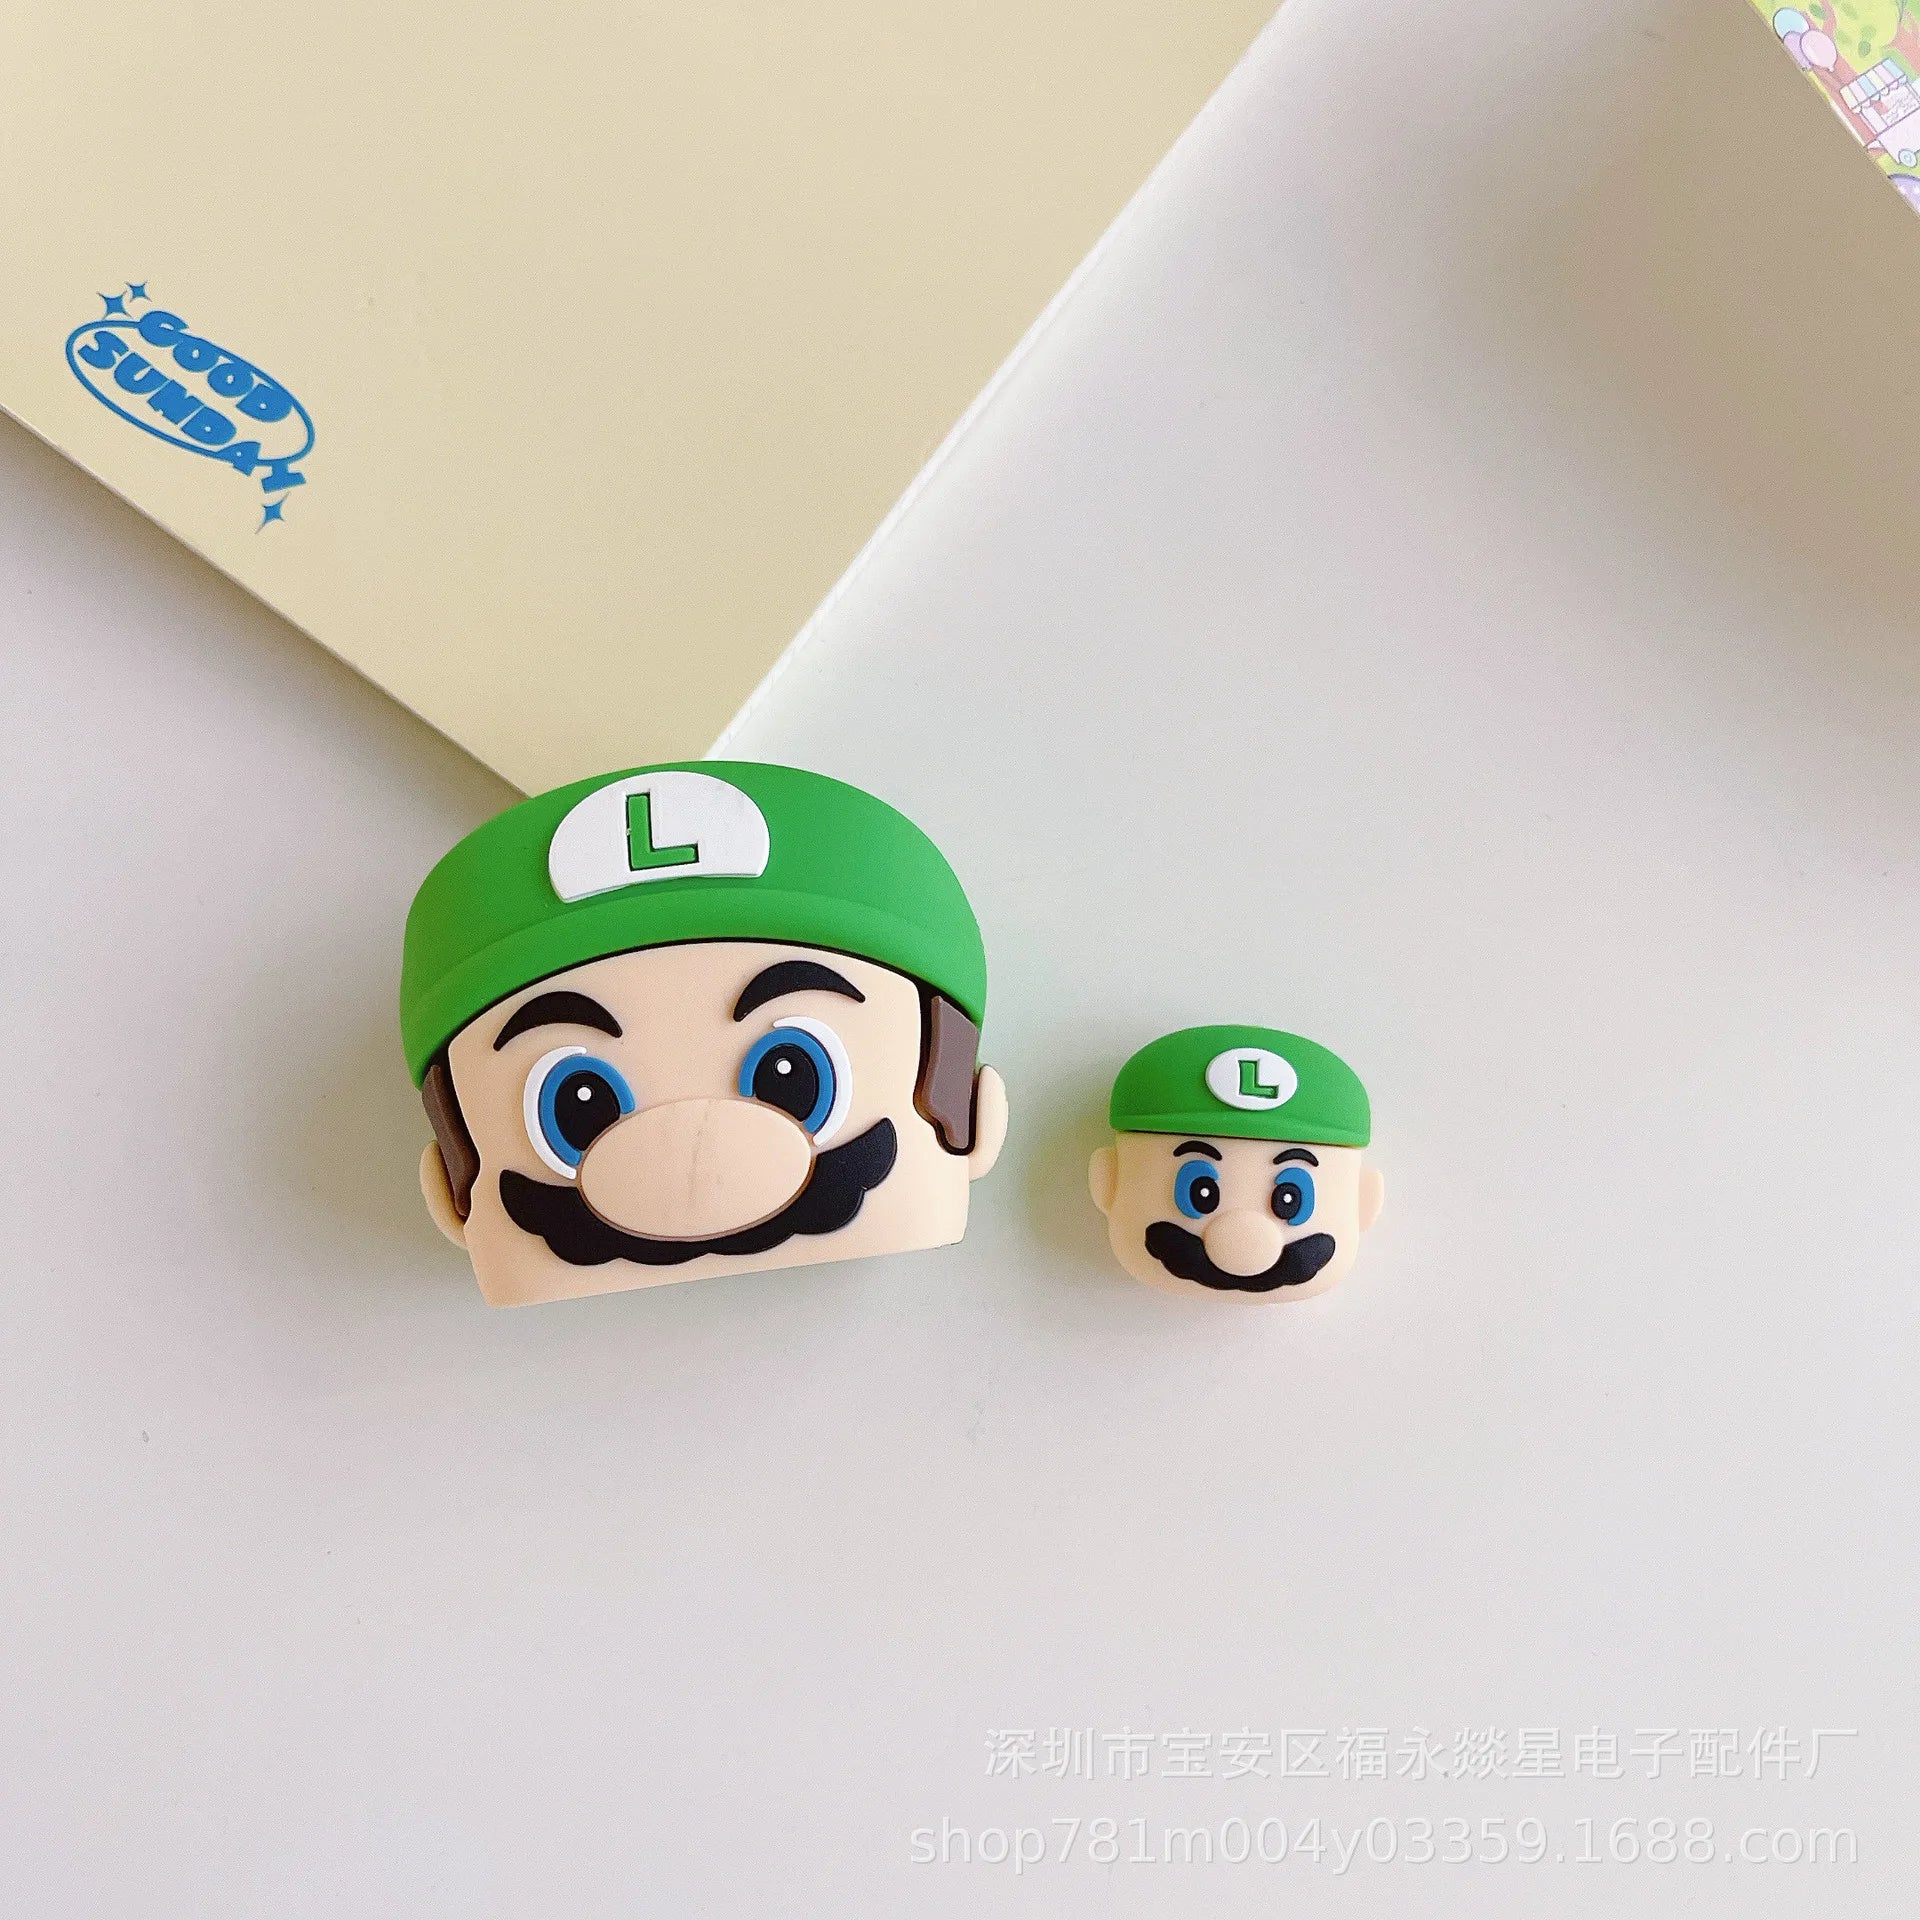 Iphone Charger Case Cover - Super Mario Bros Green